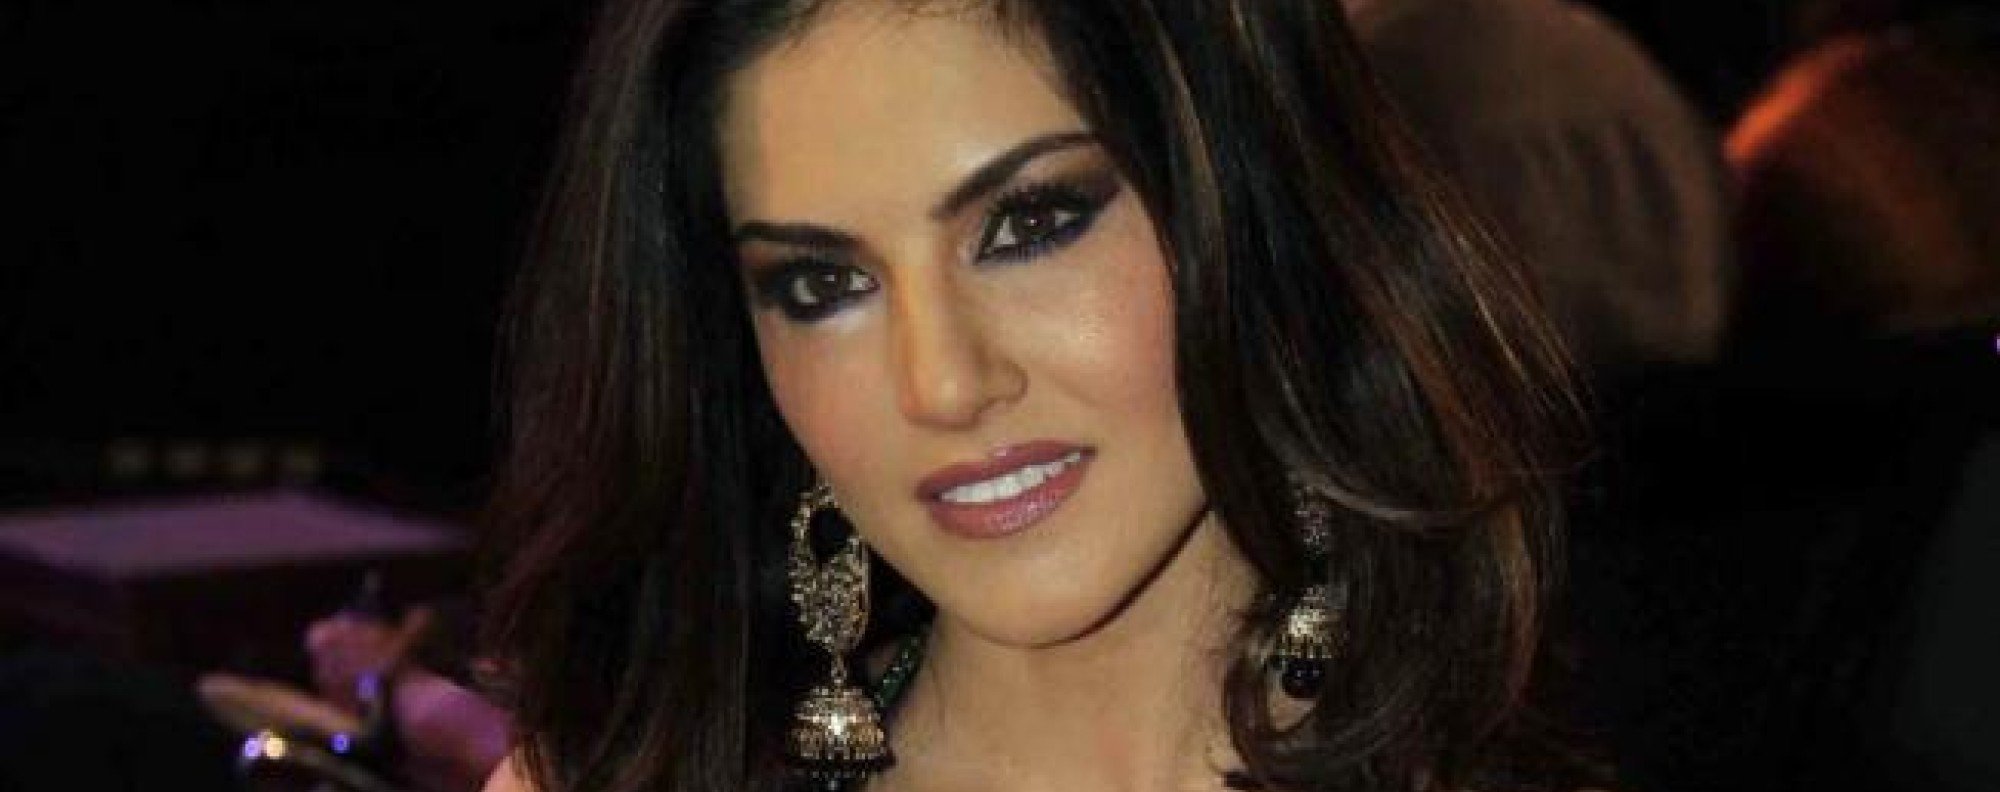 Xxx Hot Reap Video - Rape crisis in India leads to calls for porn star Sunny Leone to be jailed  | South China Morning Post